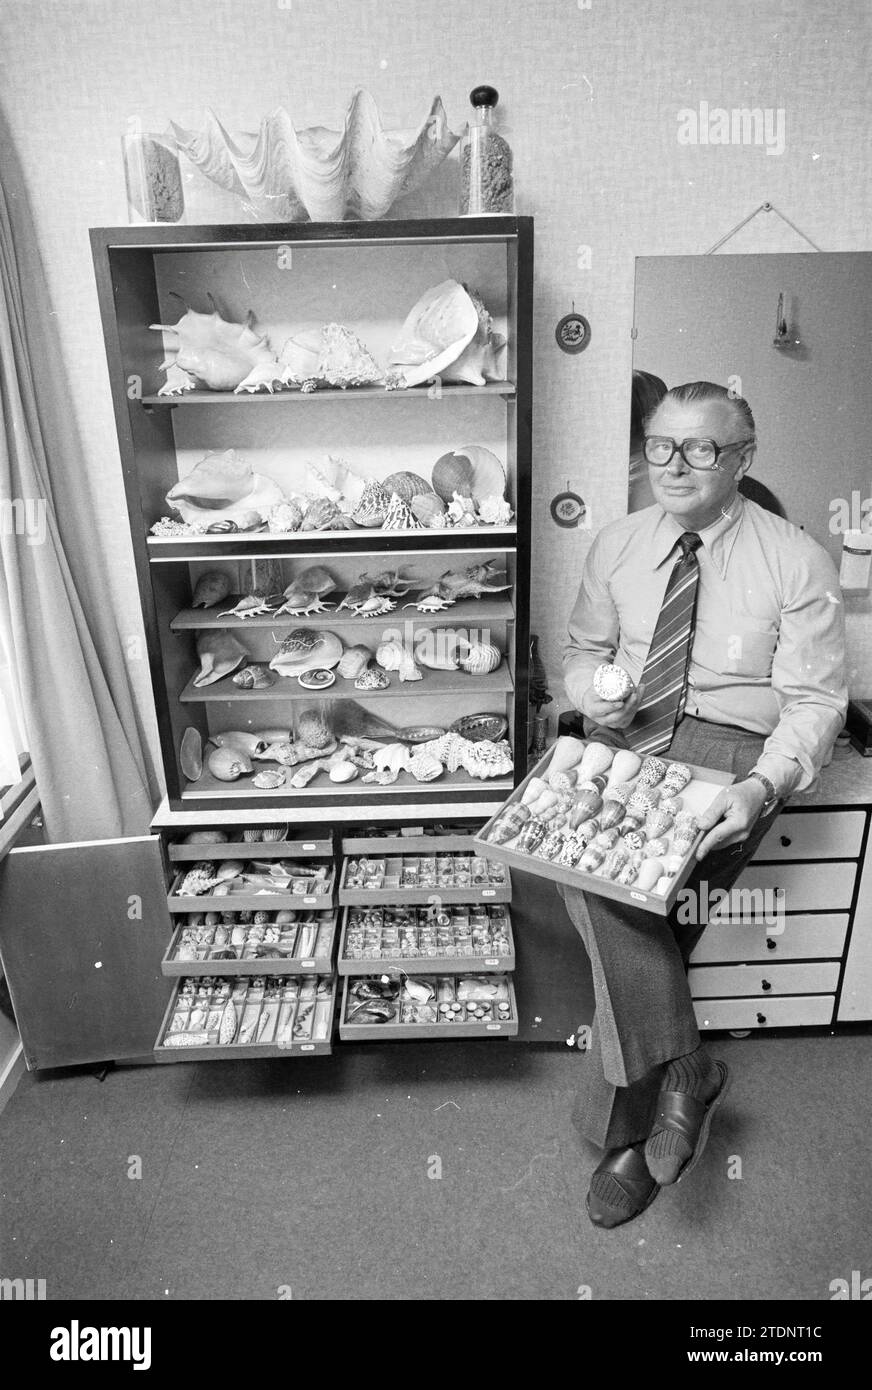 Man with shell collection, 00-00-1978, Whizgle News from the Past, Tailored for the Future. Explore historical narratives, Dutch The Netherlands agency image with a modern perspective, bridging the gap between yesterday's events and tomorrow's insights. A timeless journey shaping the stories that shape our future Stock Photo